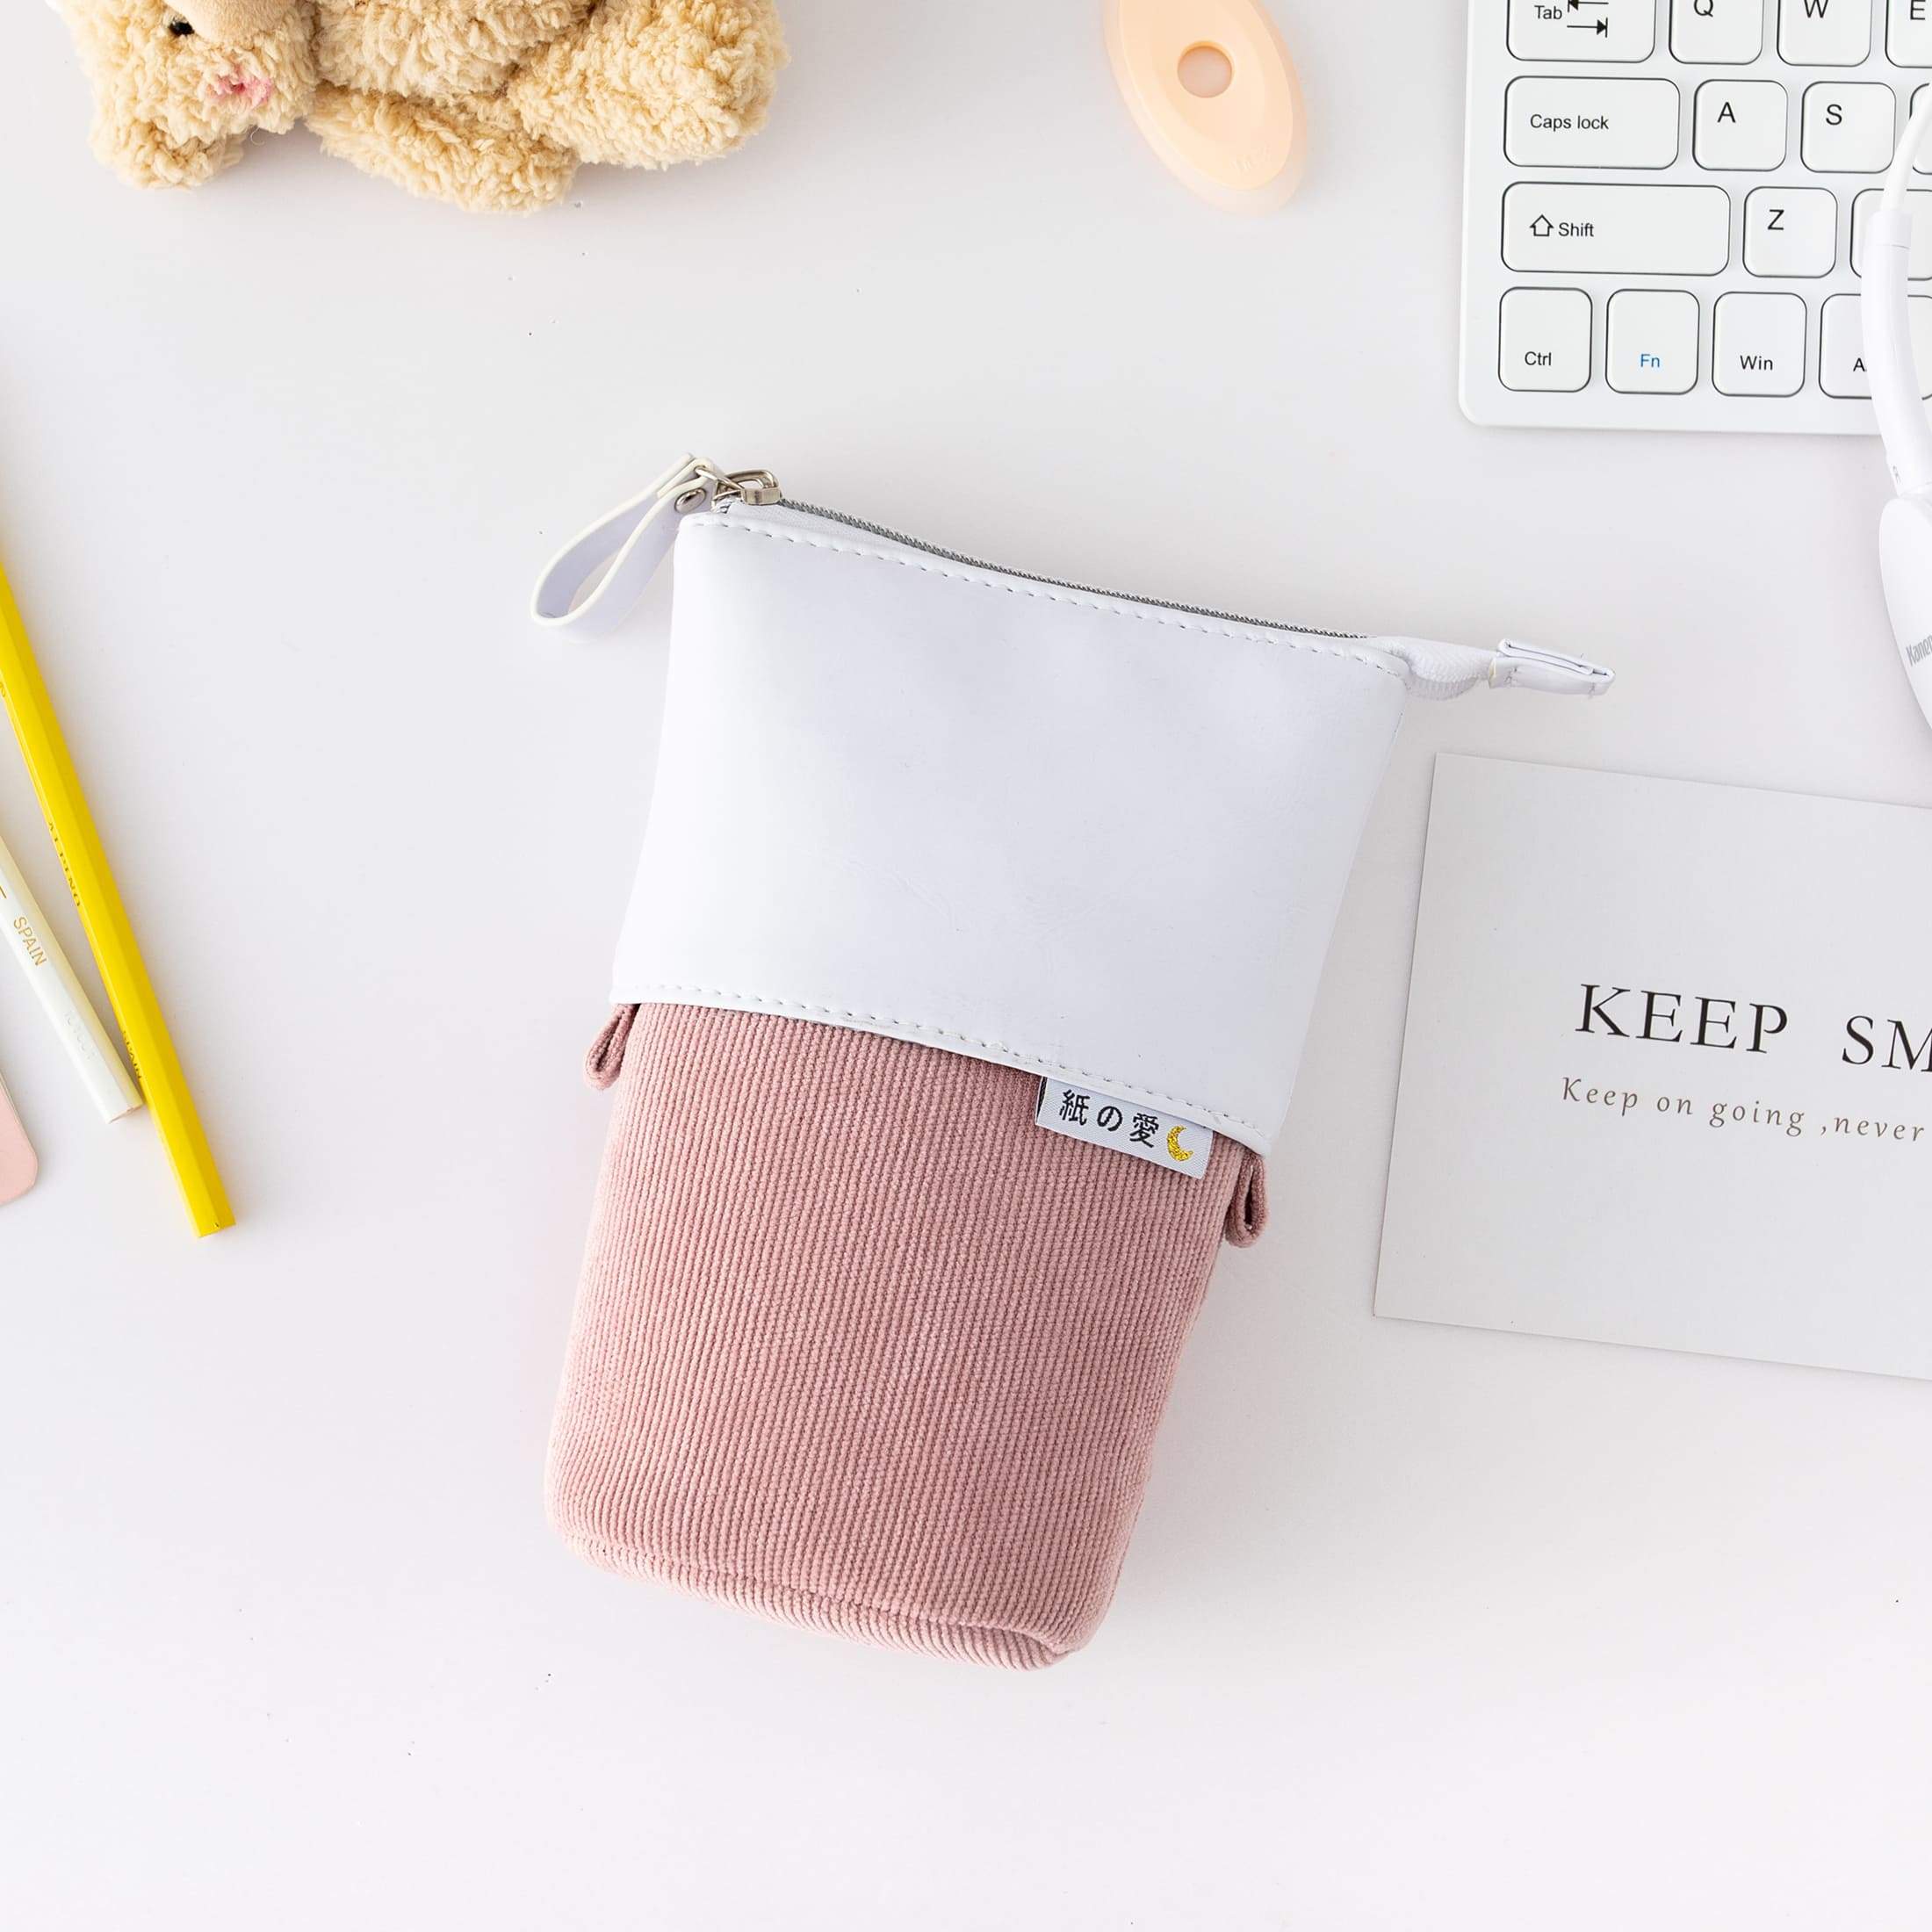 Pencil Case Essentials: The Definitive Guide – NotebookTherapy